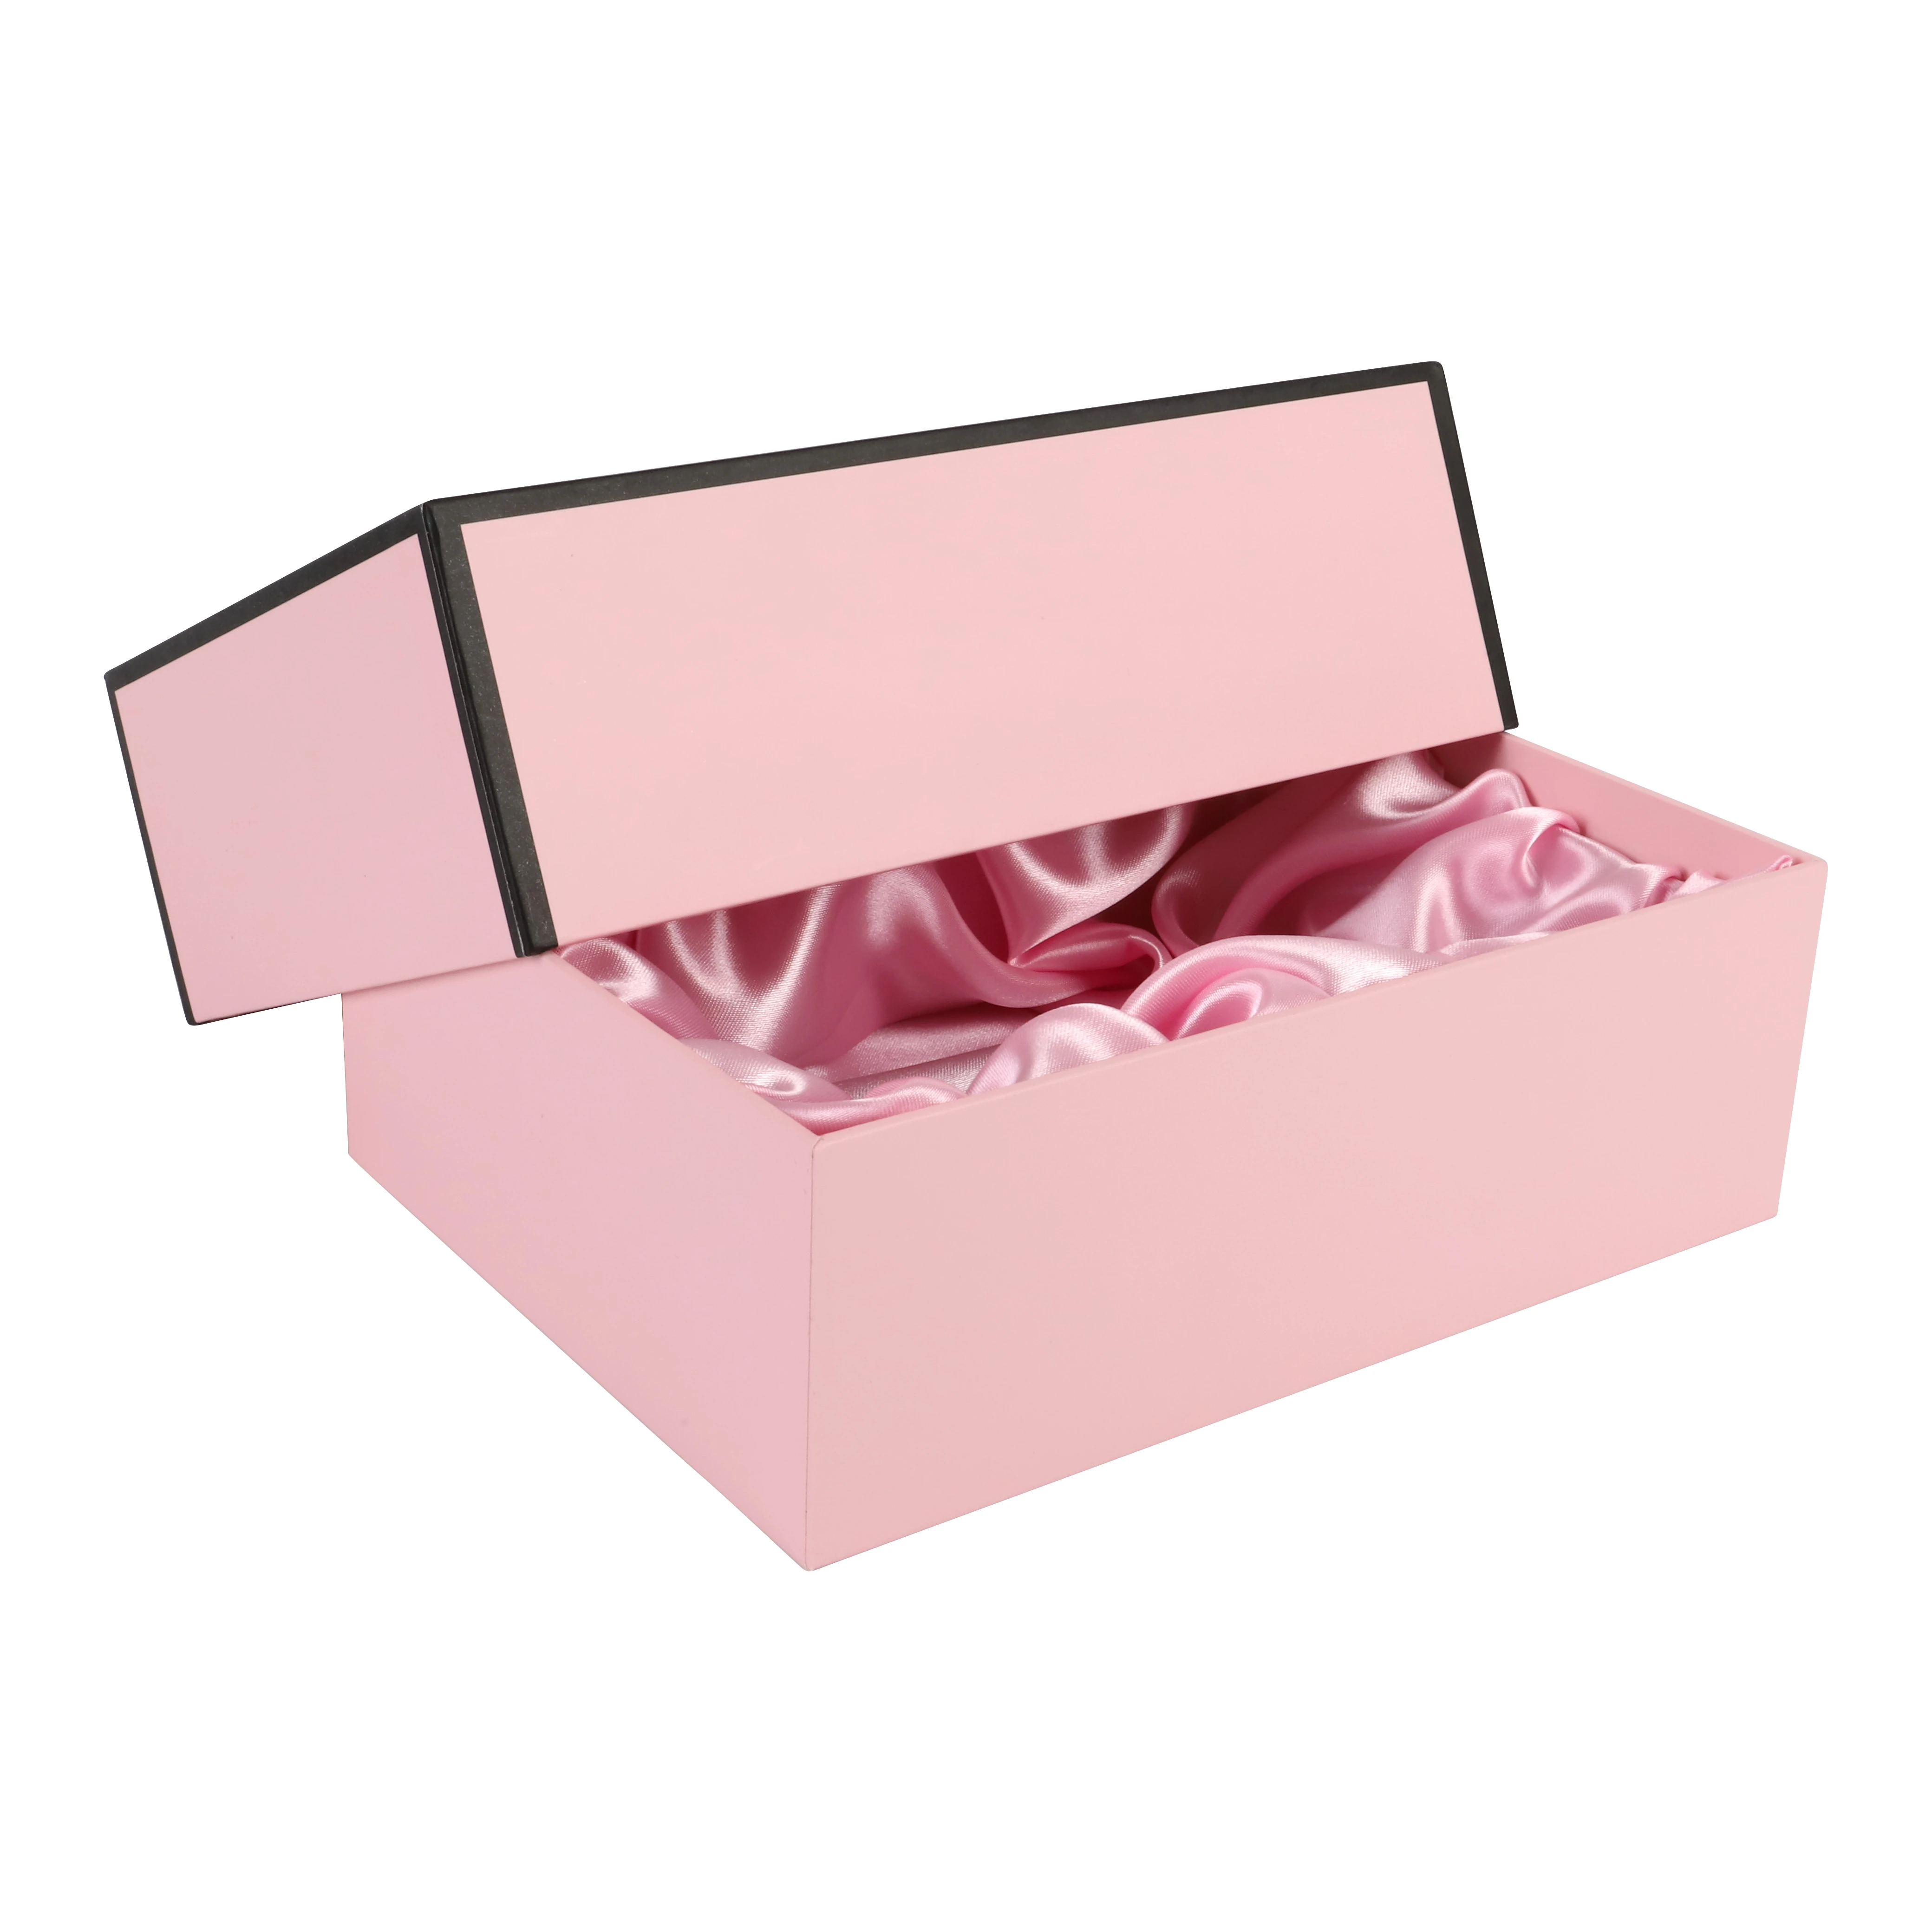 Custom Handmade Hair Extension Bundle Packaging Gift Box With Satin Lining